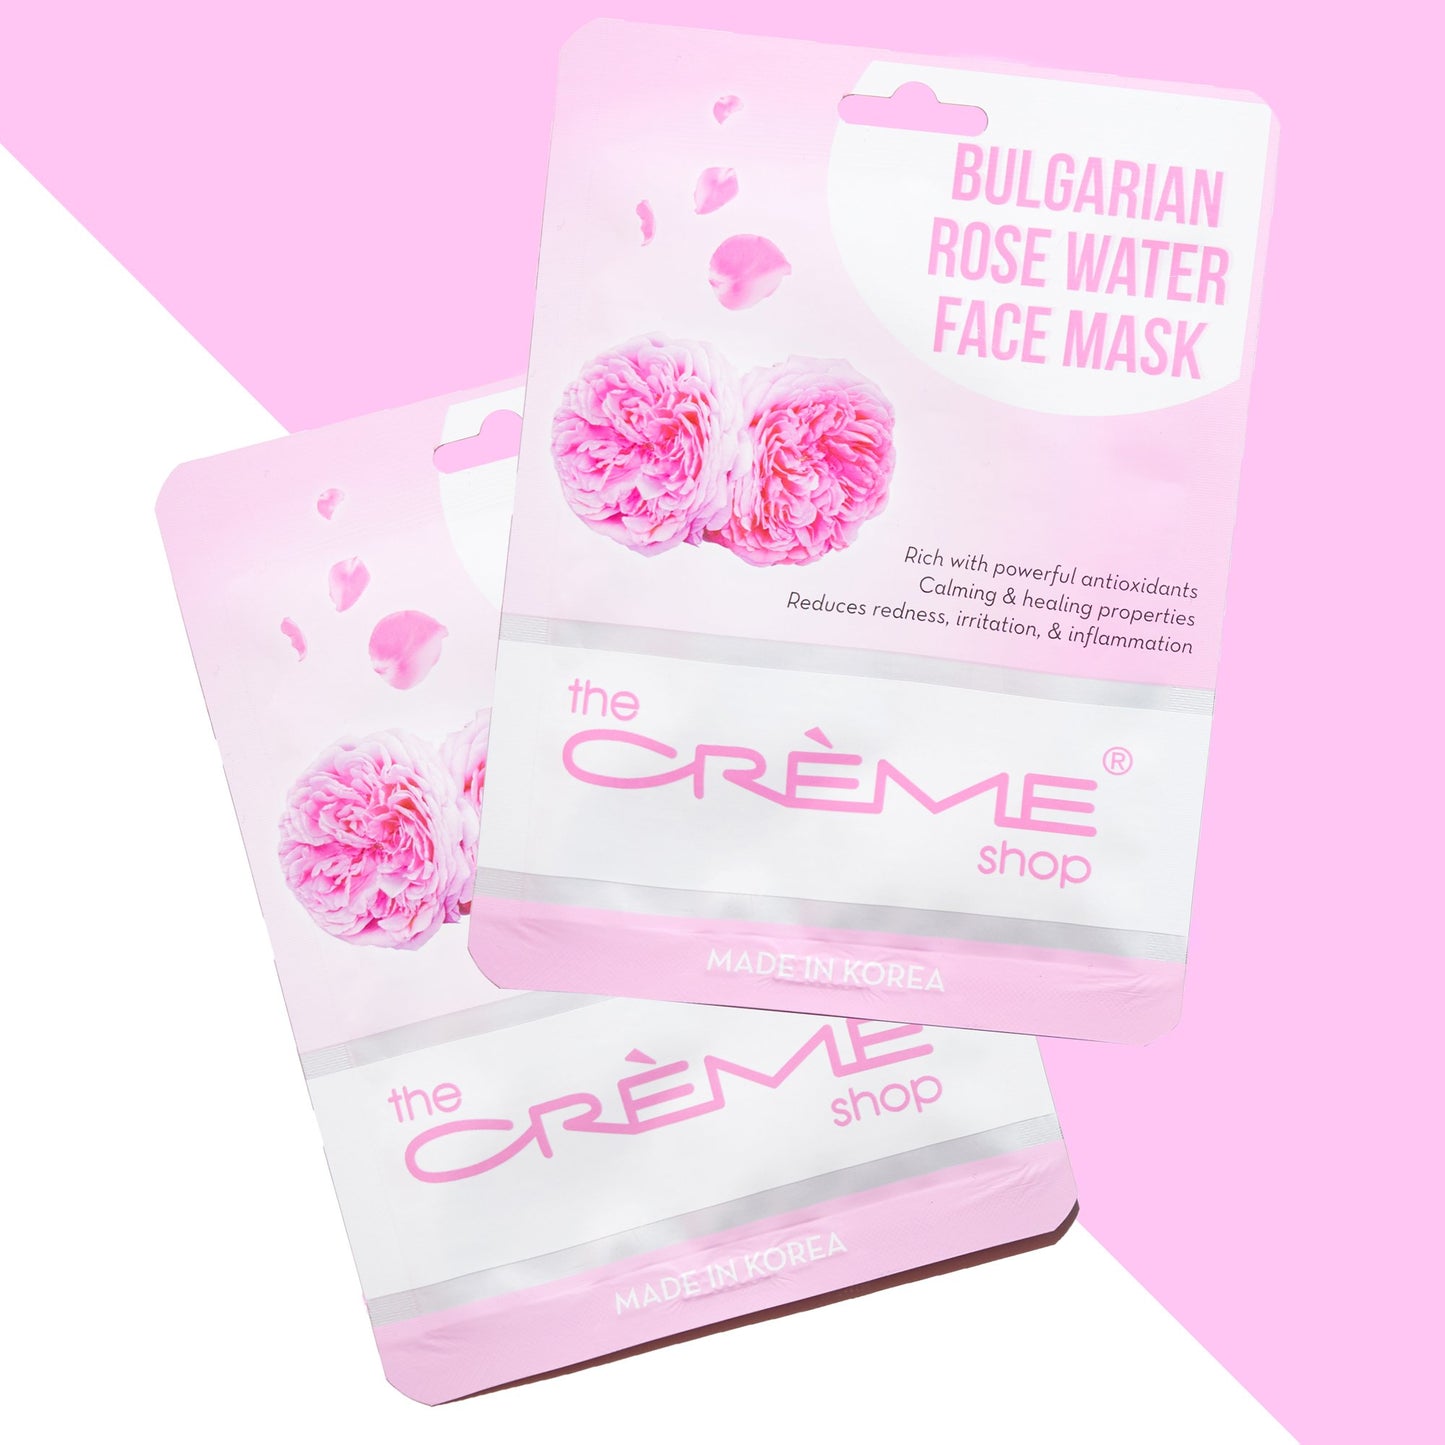 Bulgarian Rose Water Face Mask - The Crème Shop